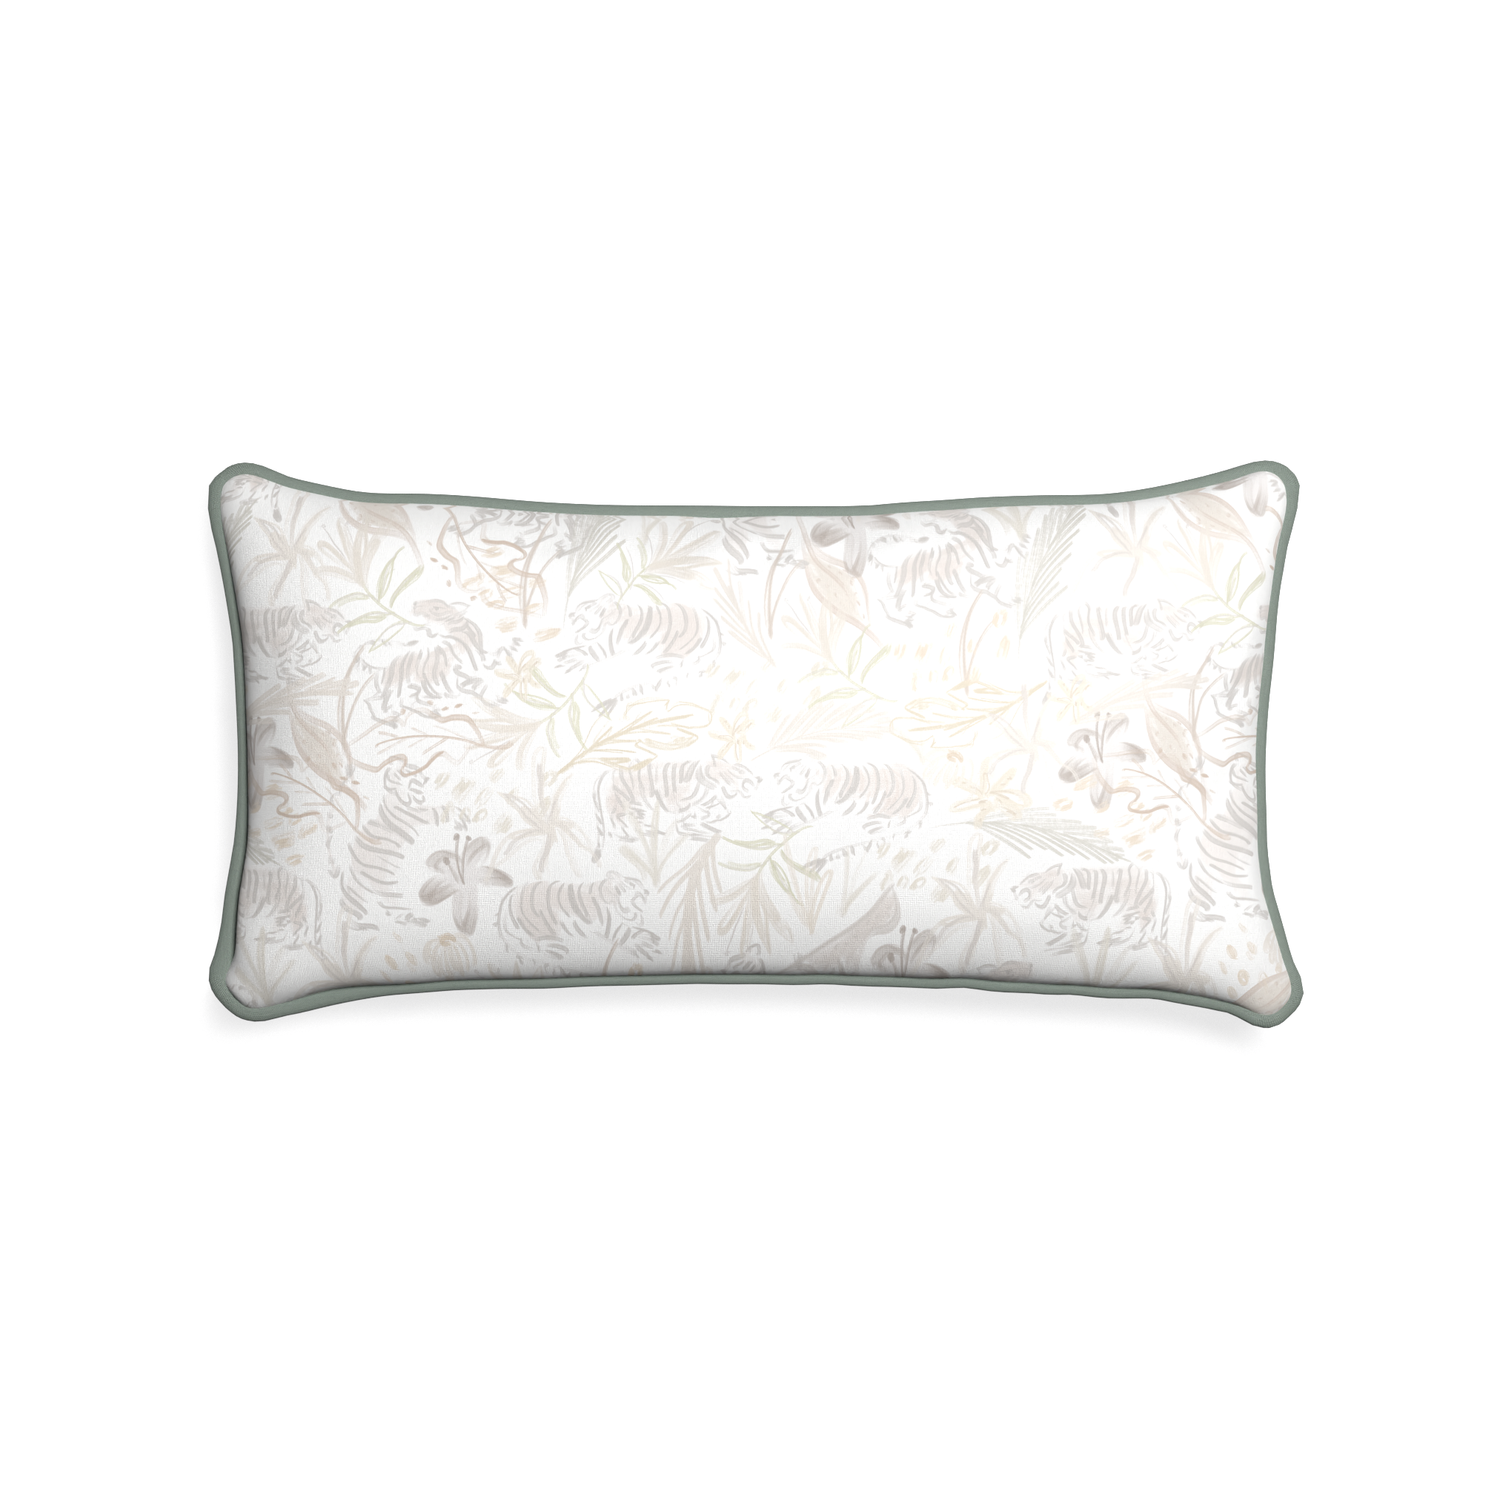 Midi-lumbar frida sand custom beige chinoiserie tigerpillow with sage piping on white background